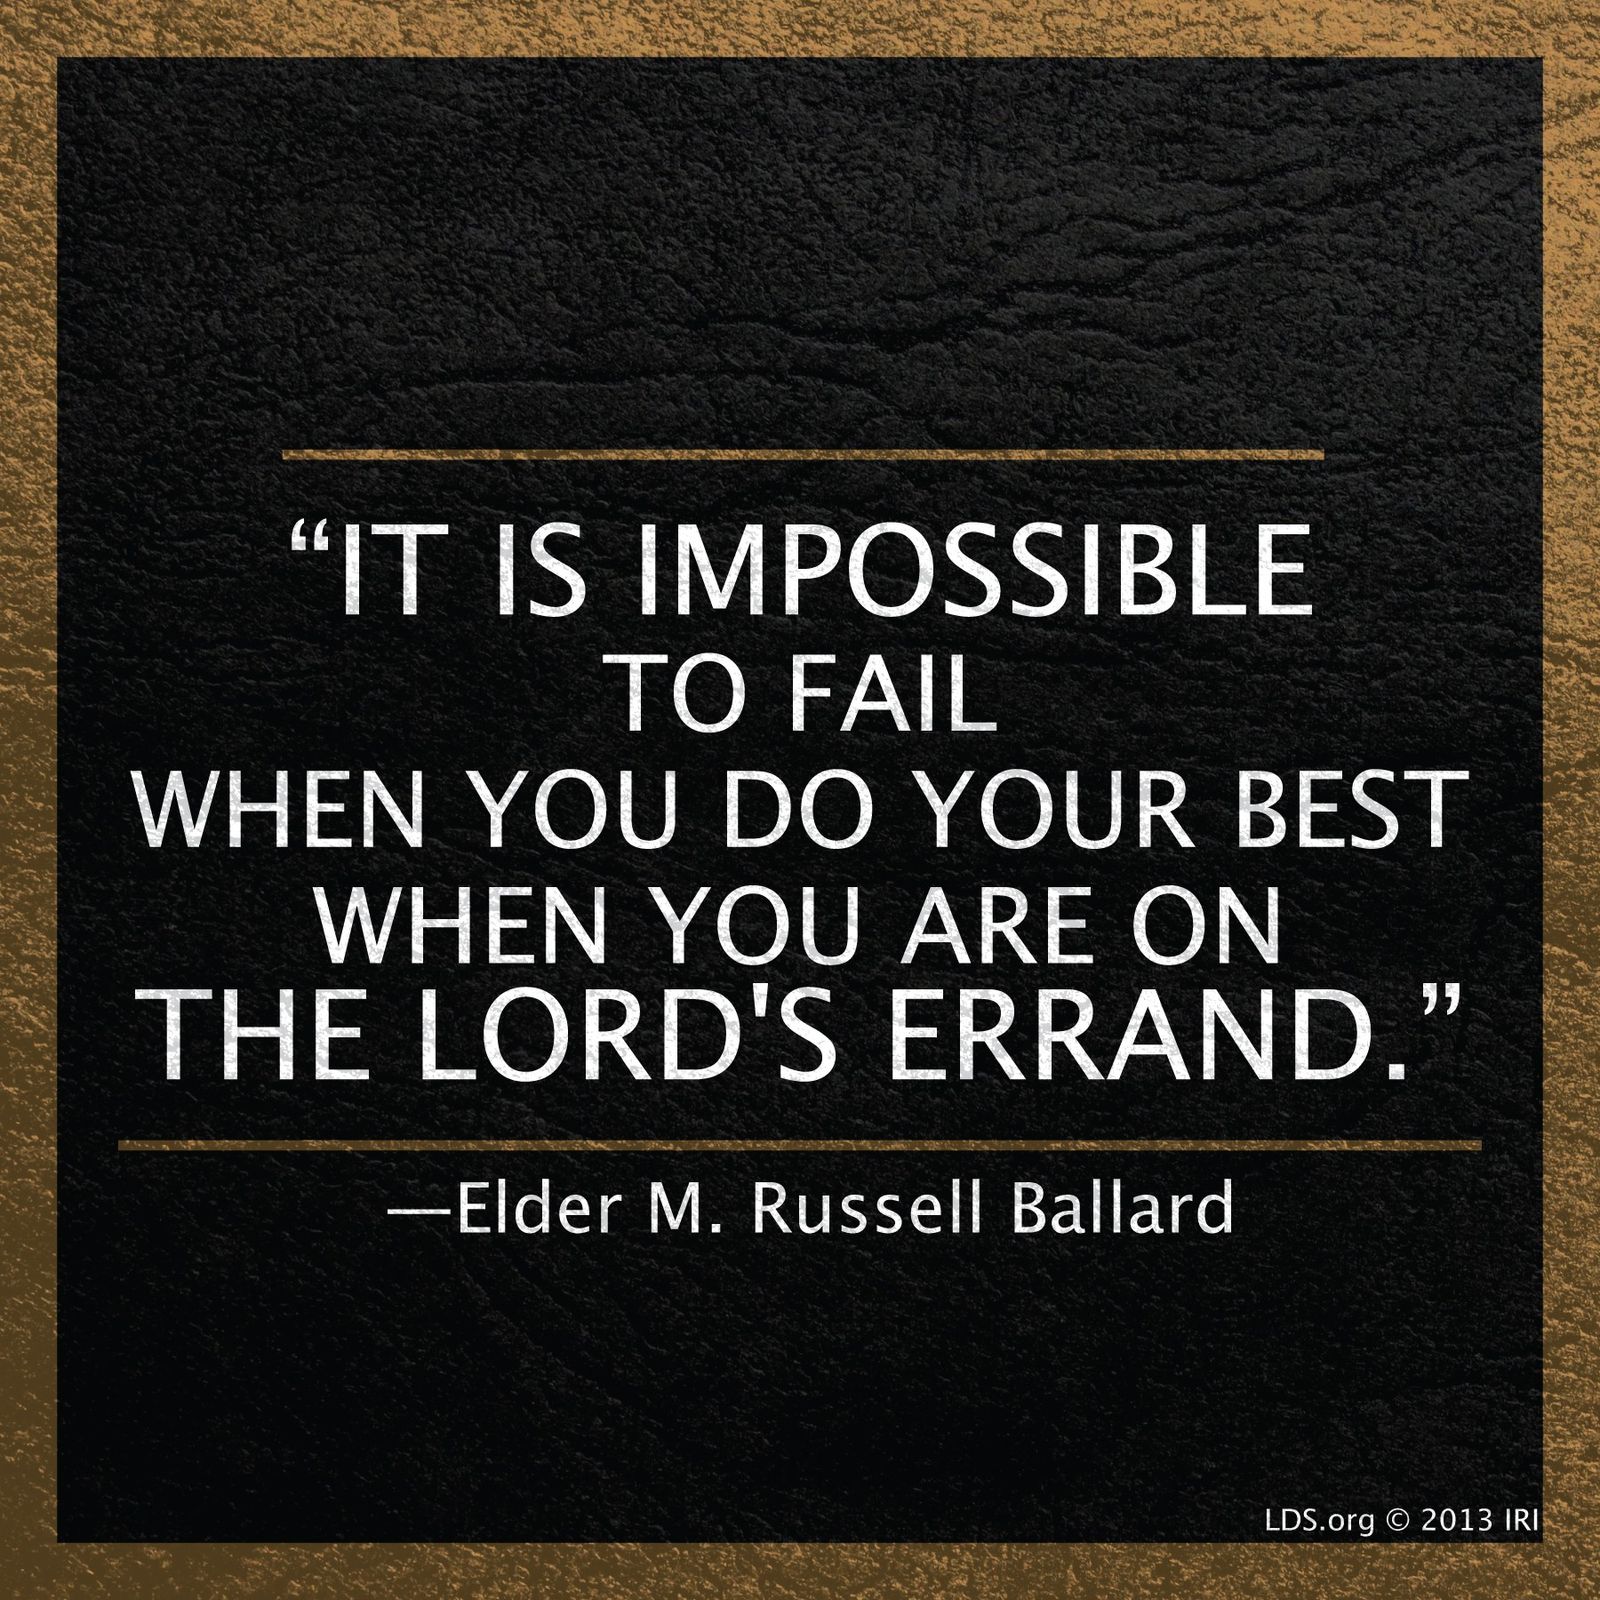 “It is impossible to fail when you do your best when you are on the Lord’s errand.”—Elder M. Russell Ballard, “Put Your Trust in the Lord”